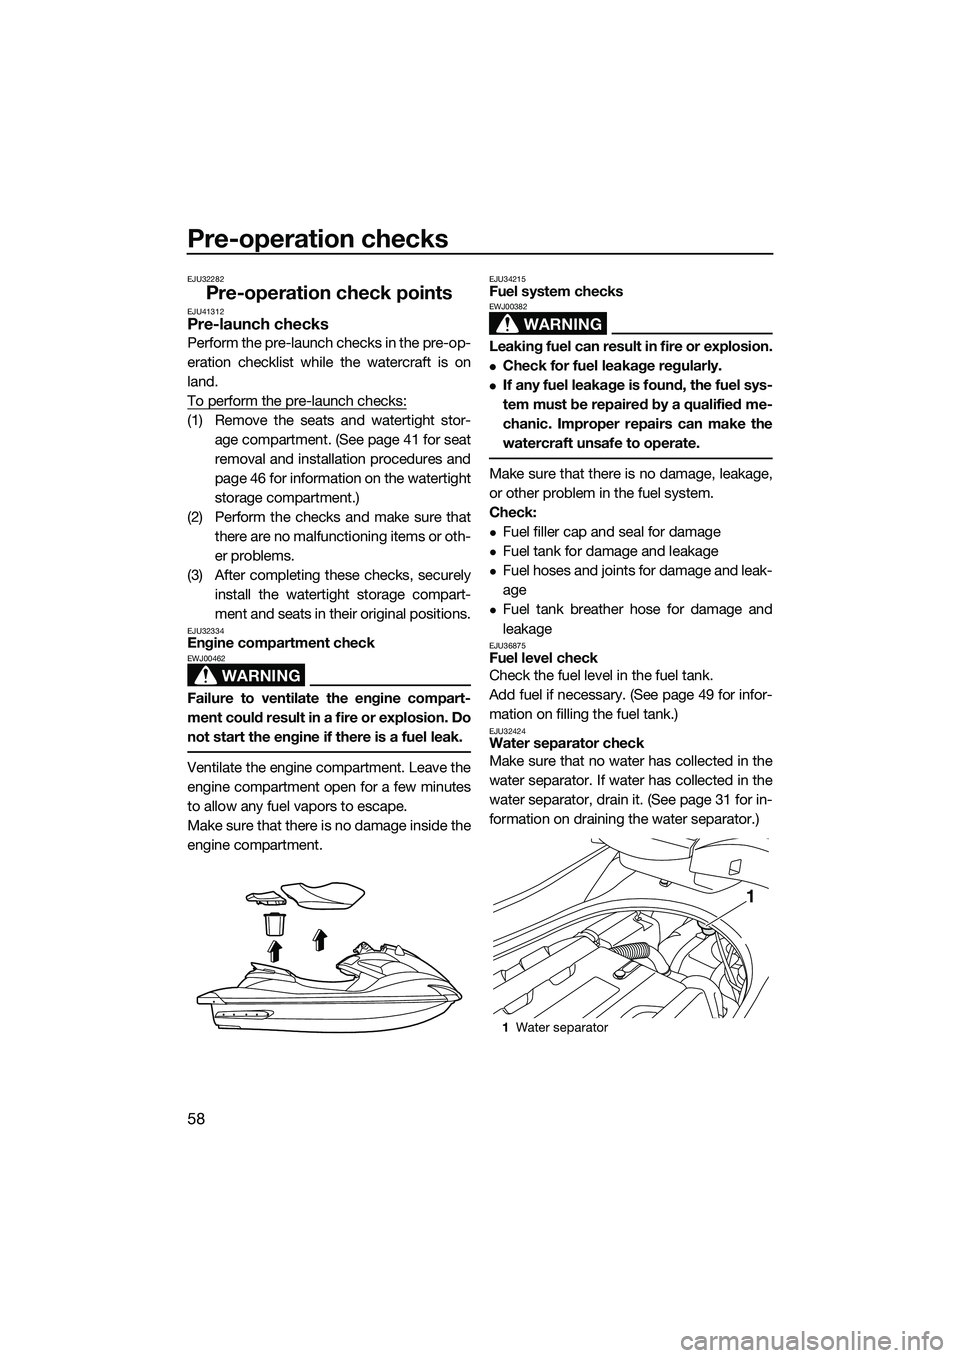 YAMAHA FZS SVHO 2014  Owners Manual Pre-operation checks
58
EJU32282
Pre-operation check pointsEJU41312Pre-launch checks
Perform the pre-launch checks in the pre-op-
eration checklist while the watercraft is on
land.
To perform the pre-